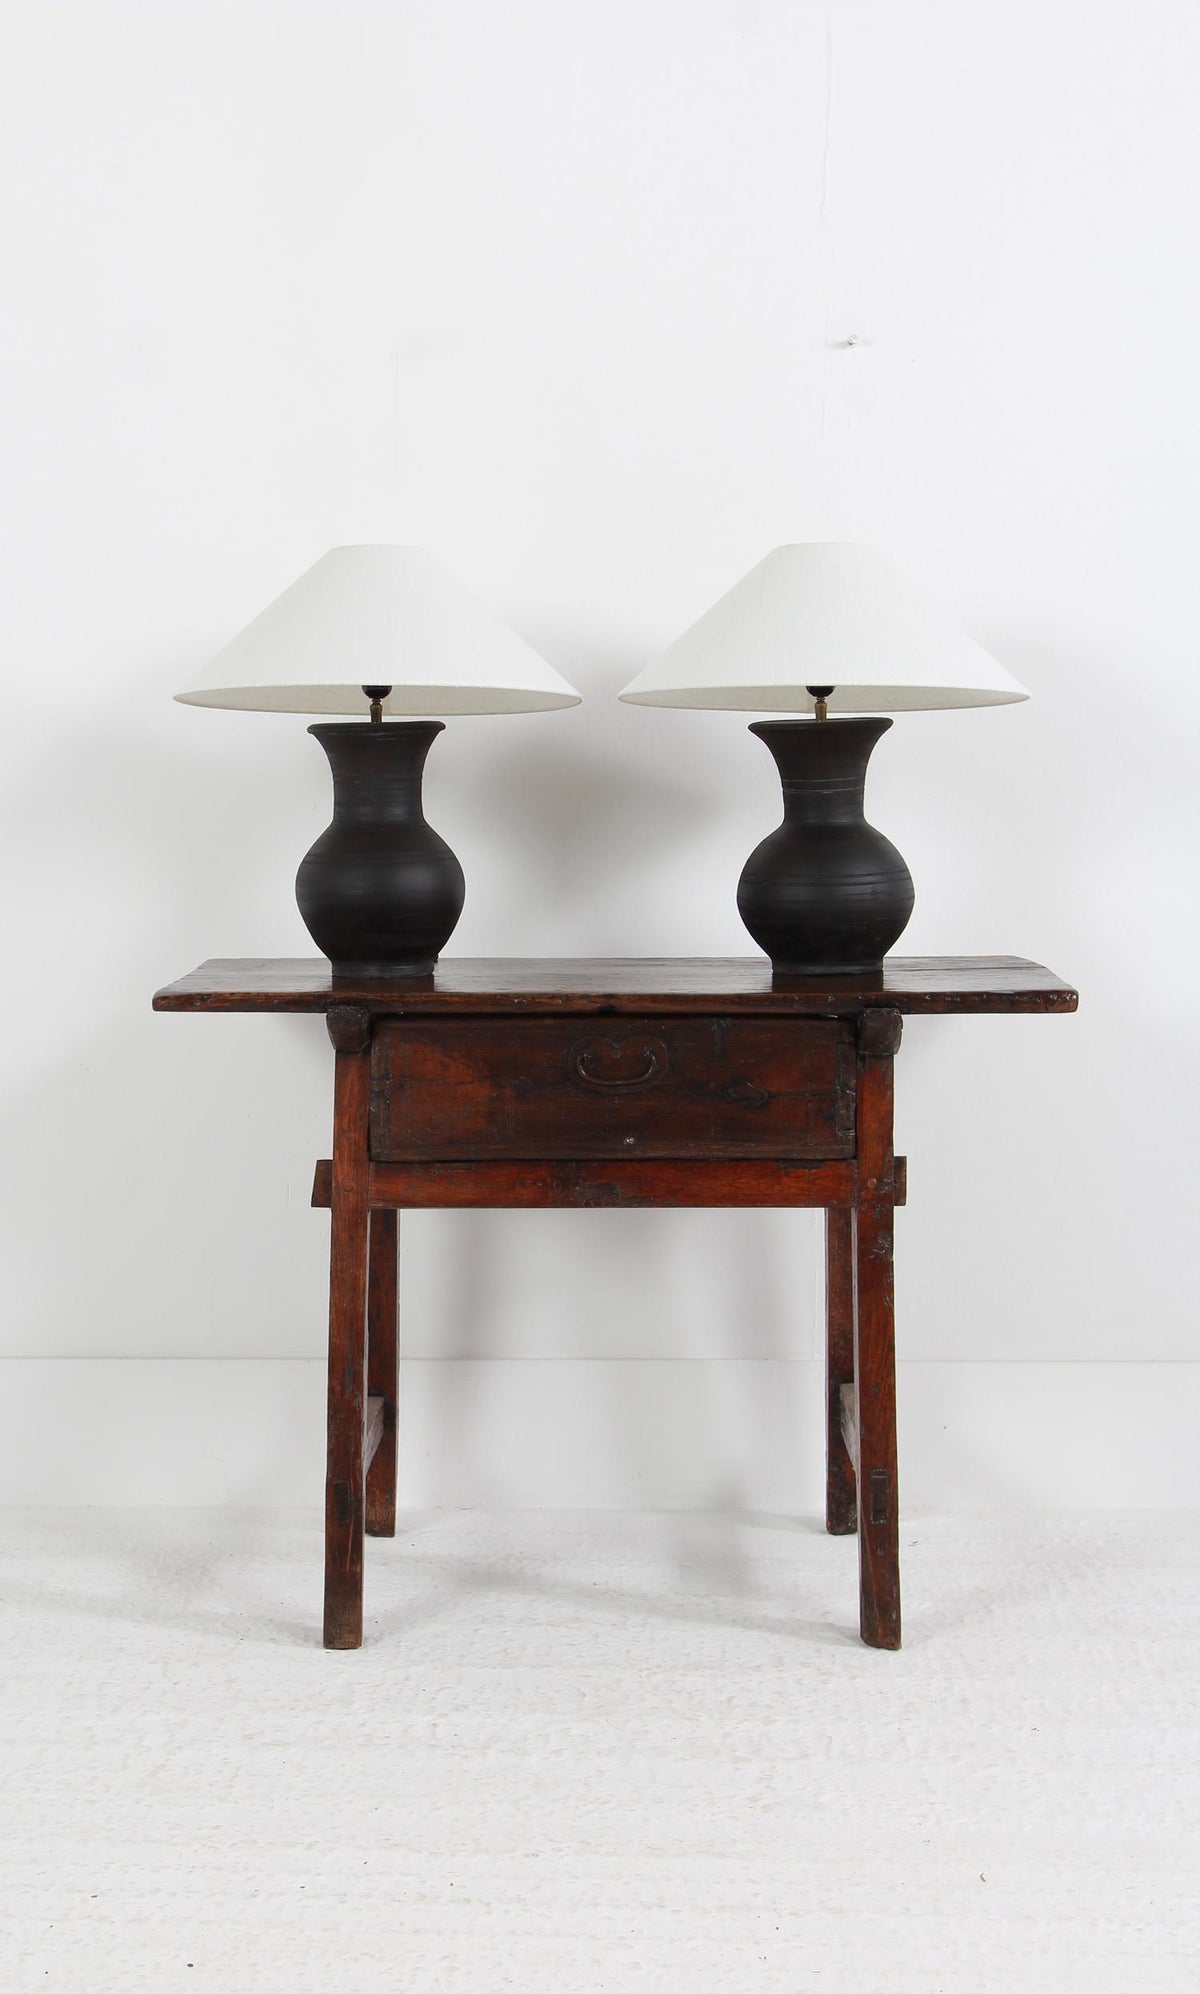 PAIR OF CHINESE HAN-STYLE LAMPS WITH HANDMADE BELGIAN WHITE LINEN SHADES